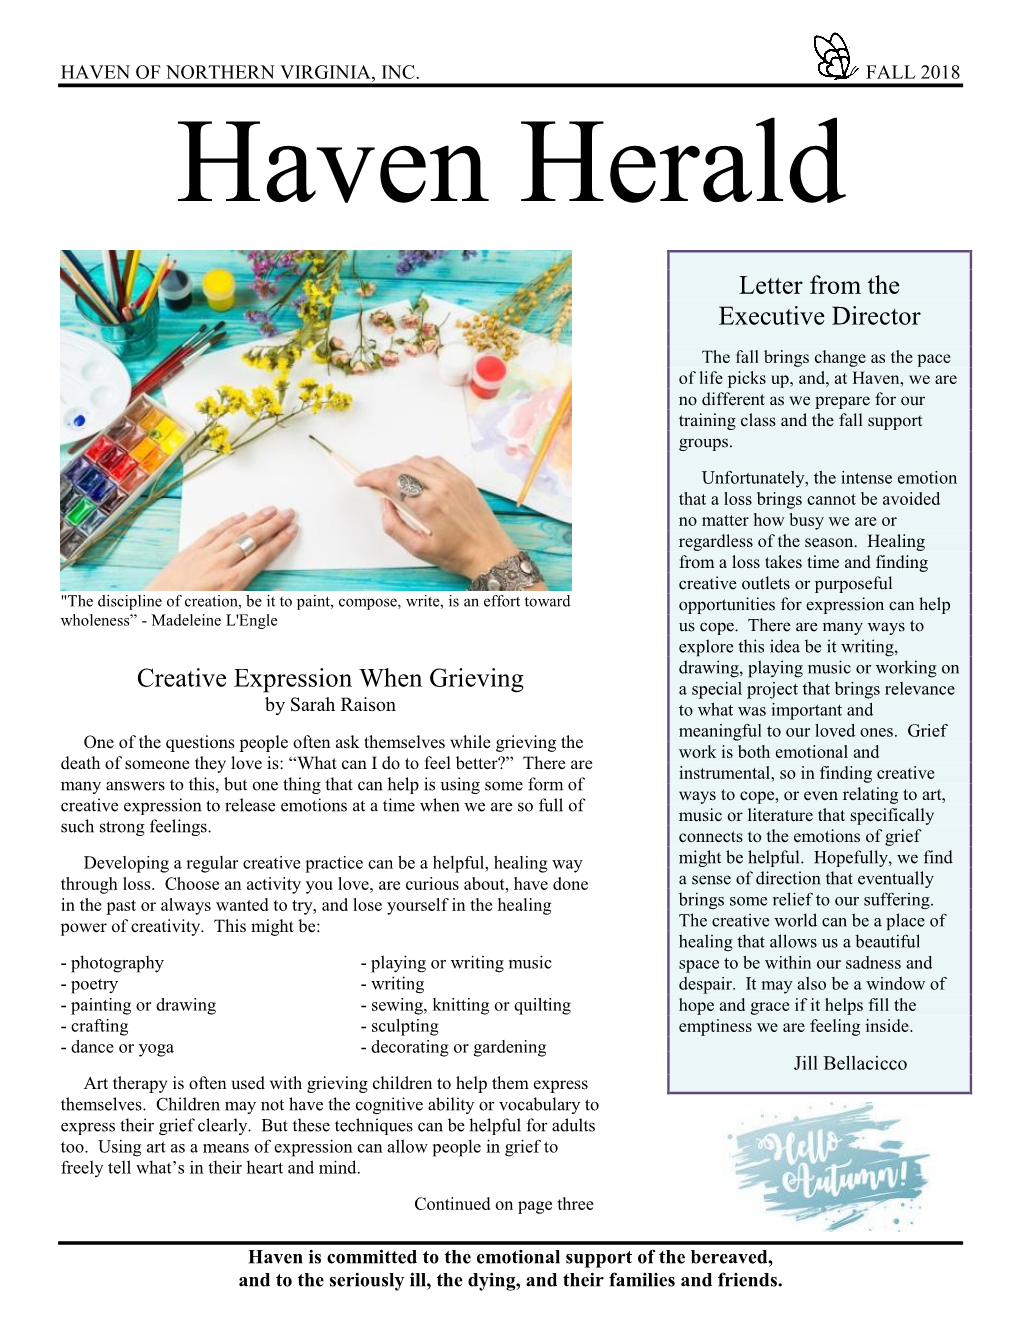 Haven Herald Fall 2018